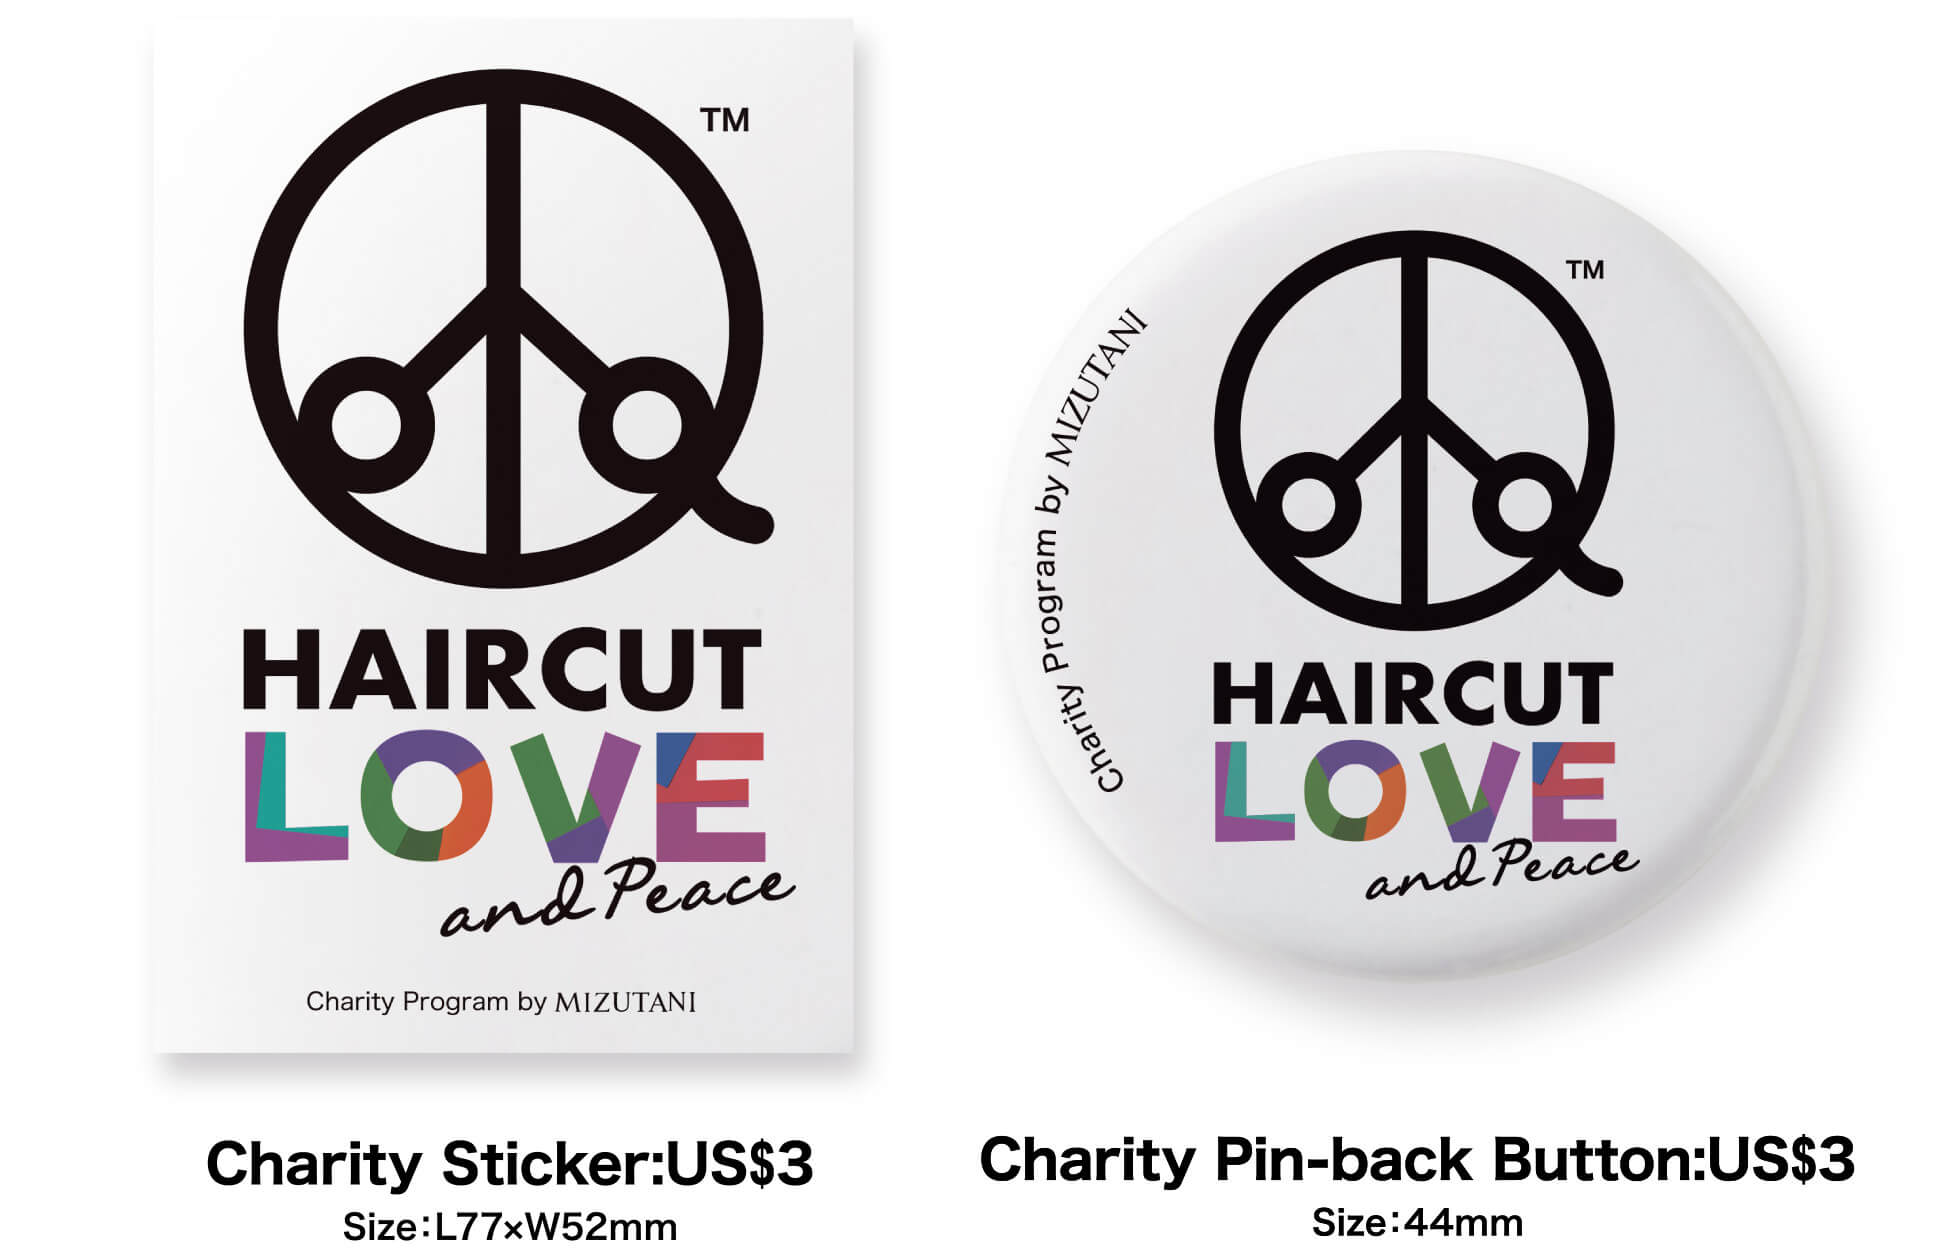 Charity Sticker/ Charity Pin-back Button